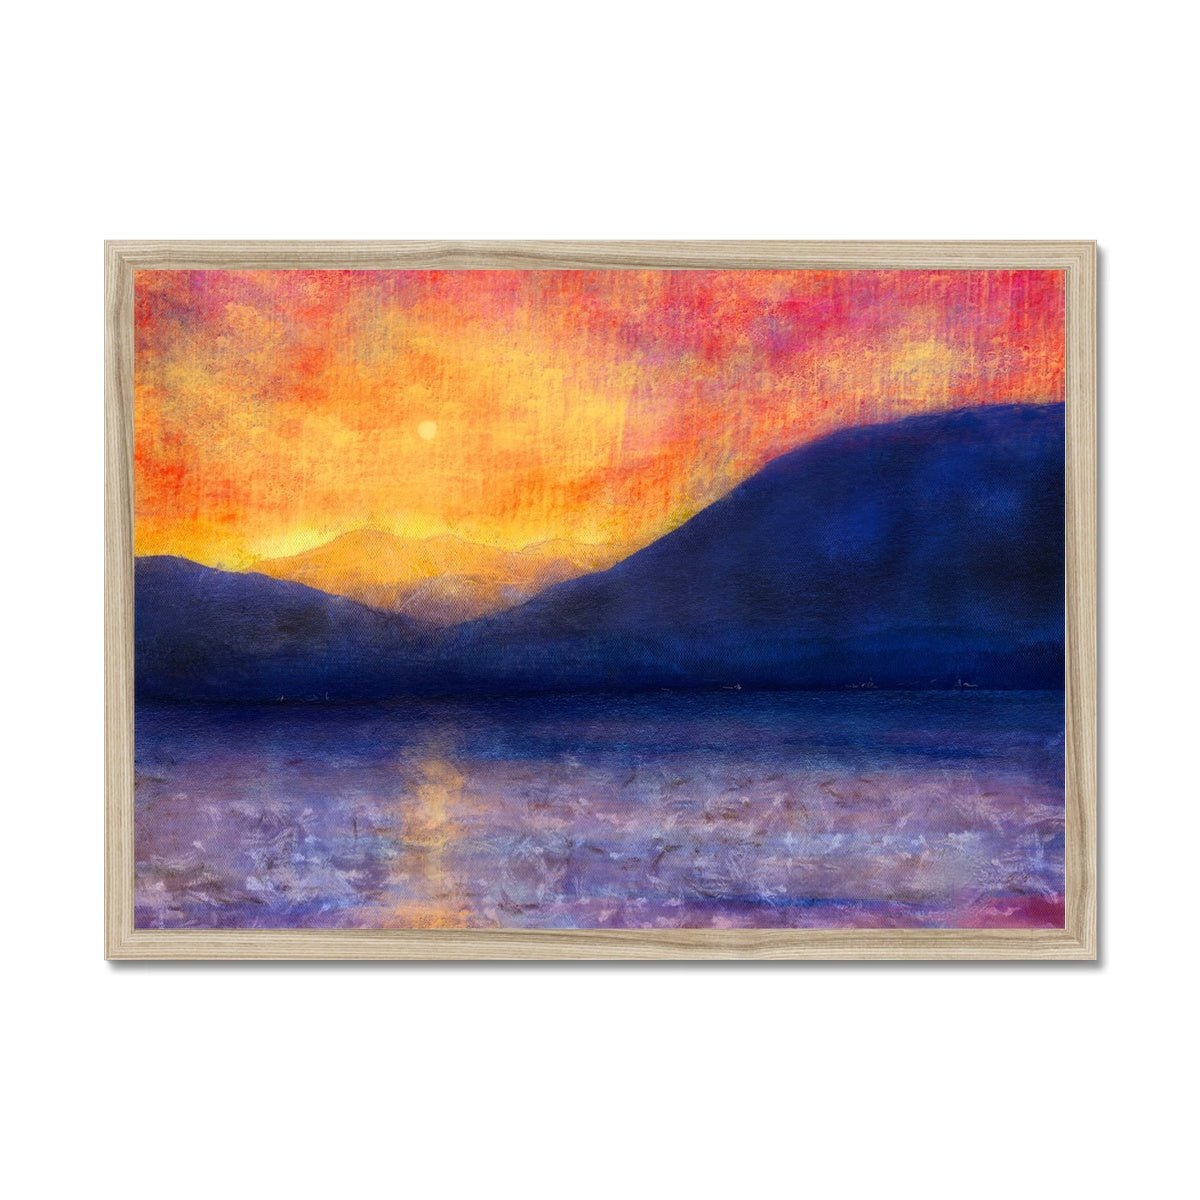 Sunset Approaching Mull Painting | Framed Prints From Scotland-Framed Prints-Hebridean Islands Art Gallery-A2 Landscape-Natural Frame-Paintings, Prints, Homeware, Art Gifts From Scotland By Scottish Artist Kevin Hunter